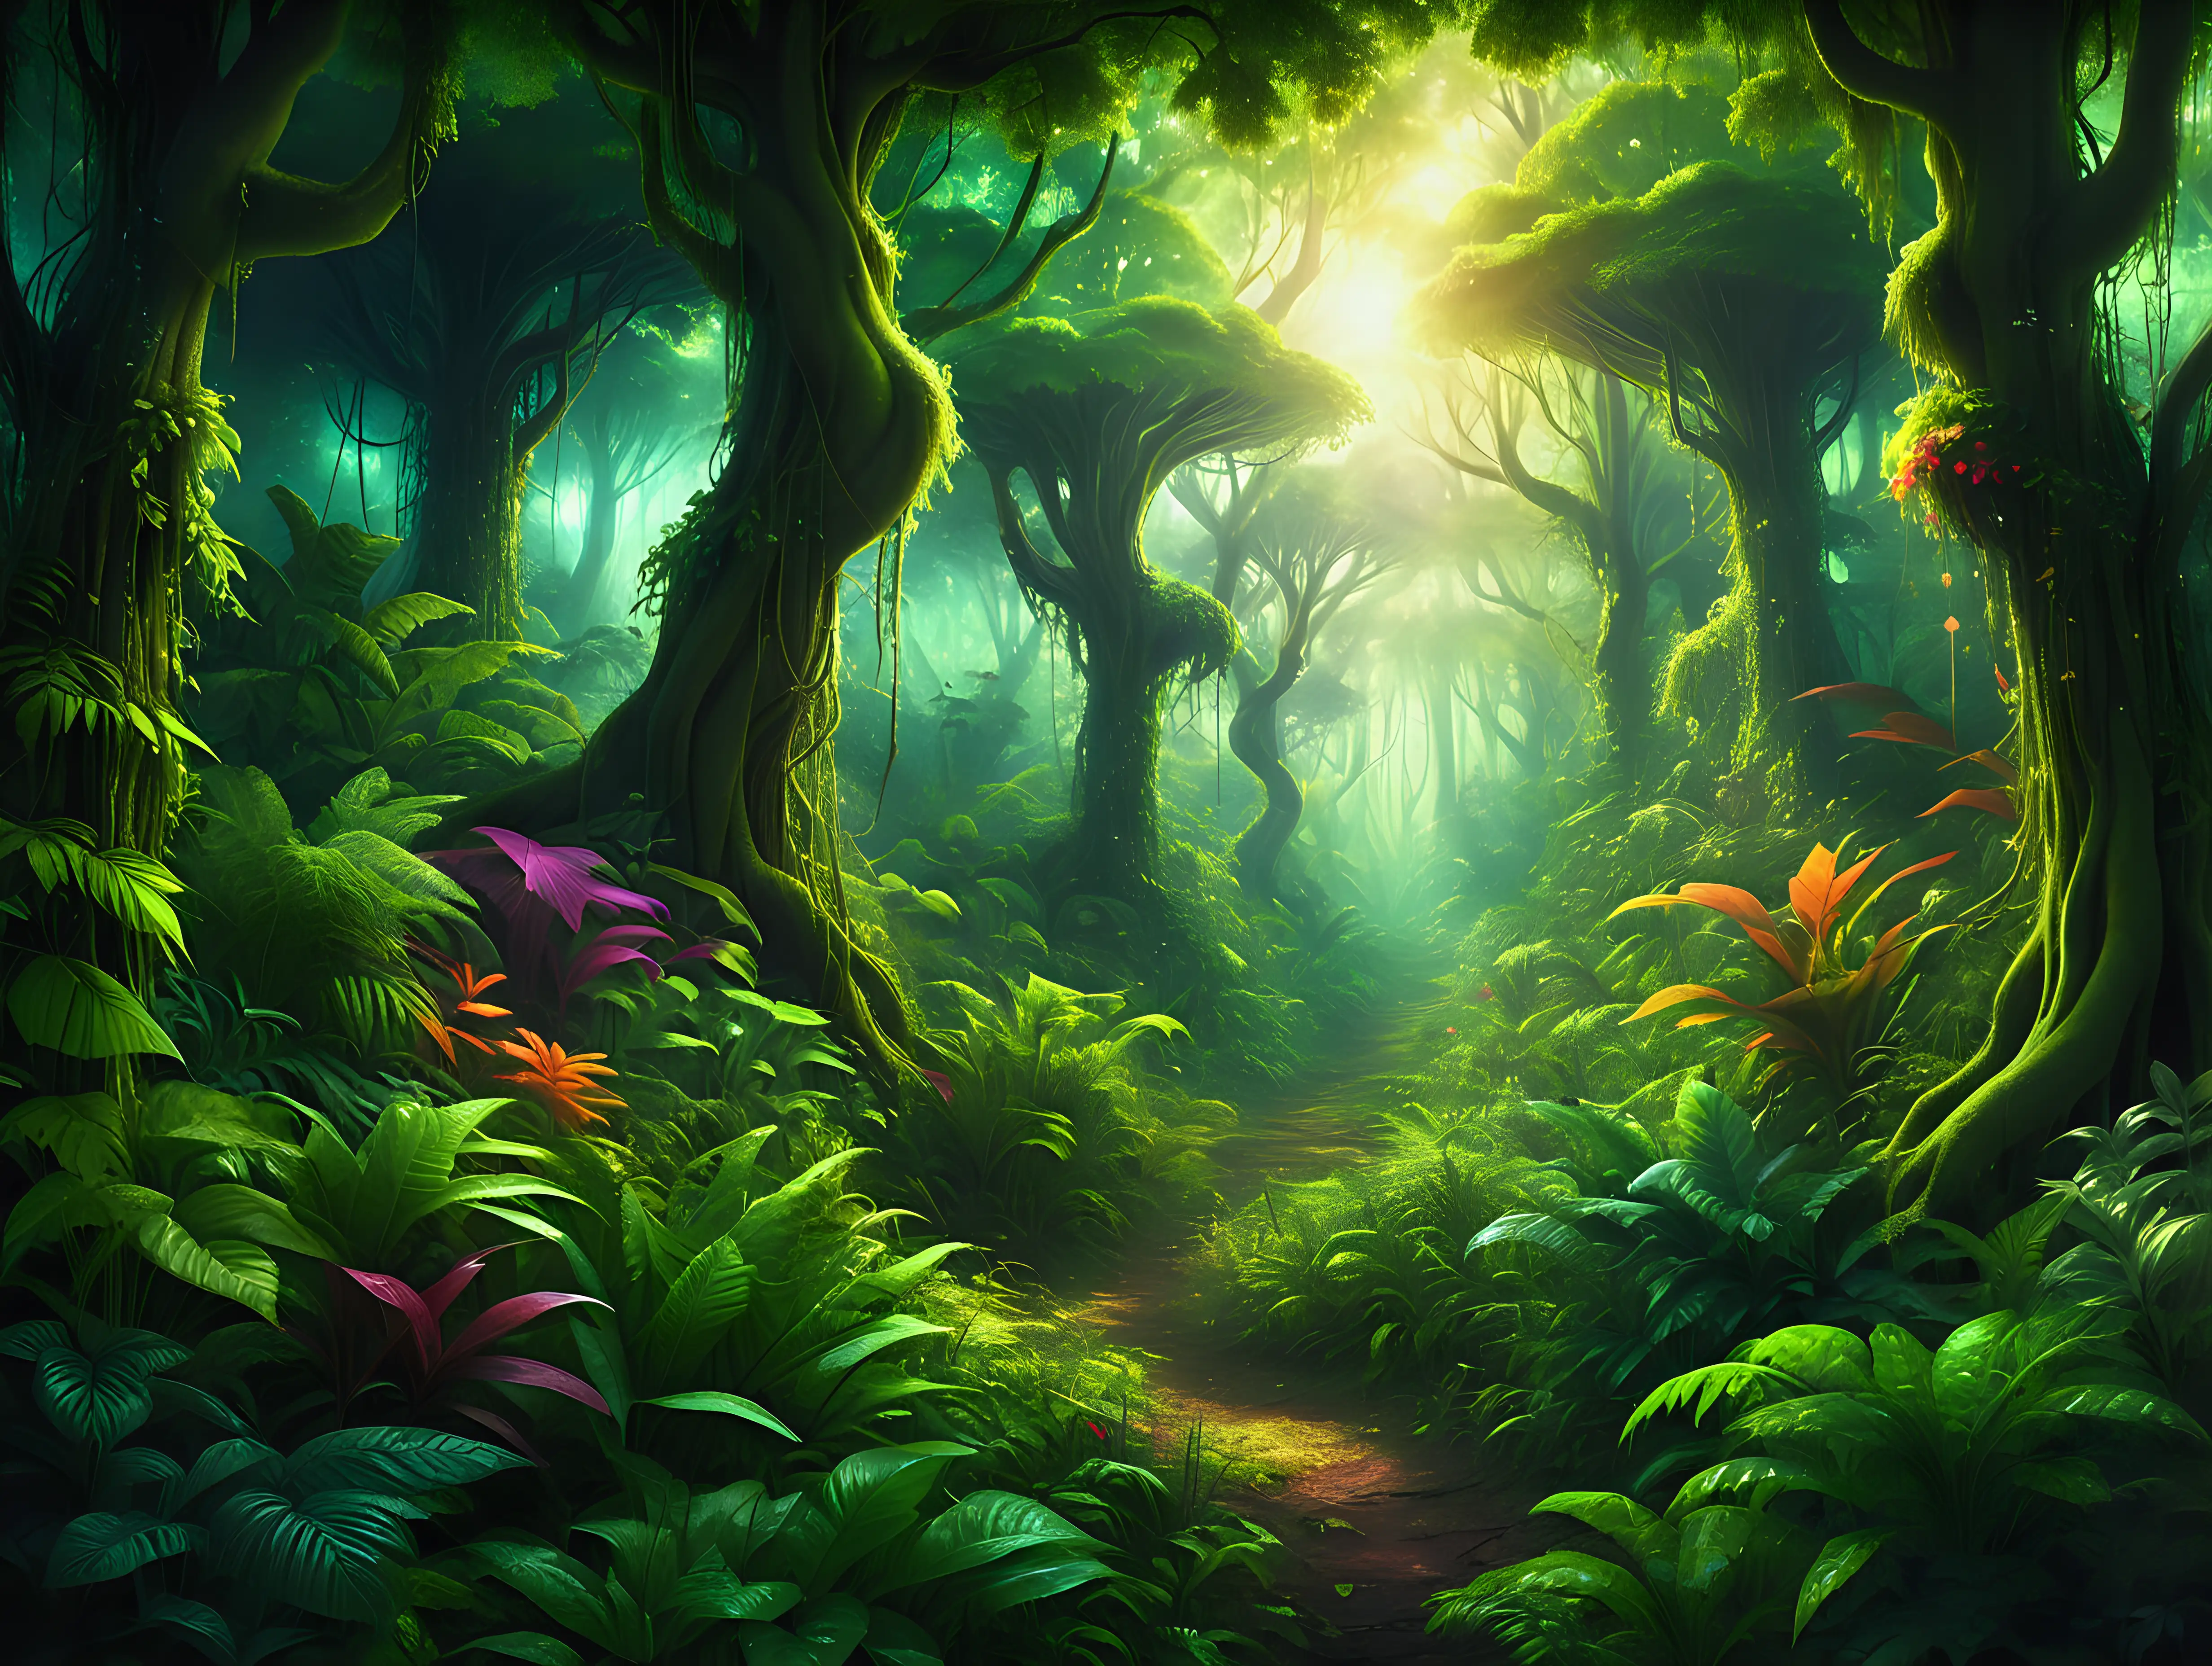 This image depicts a lush, green and vibrant forest, full of bright colour. The mystical forest is dense with various types of trees and vegetation, including large, thick vines, and broad-leaved plants. The atmosphere appears enchanted, adding a sense of peace and tranquility to the scene. The lighting suggests that it might be dawn, creating a serene and enchanting ambiance.